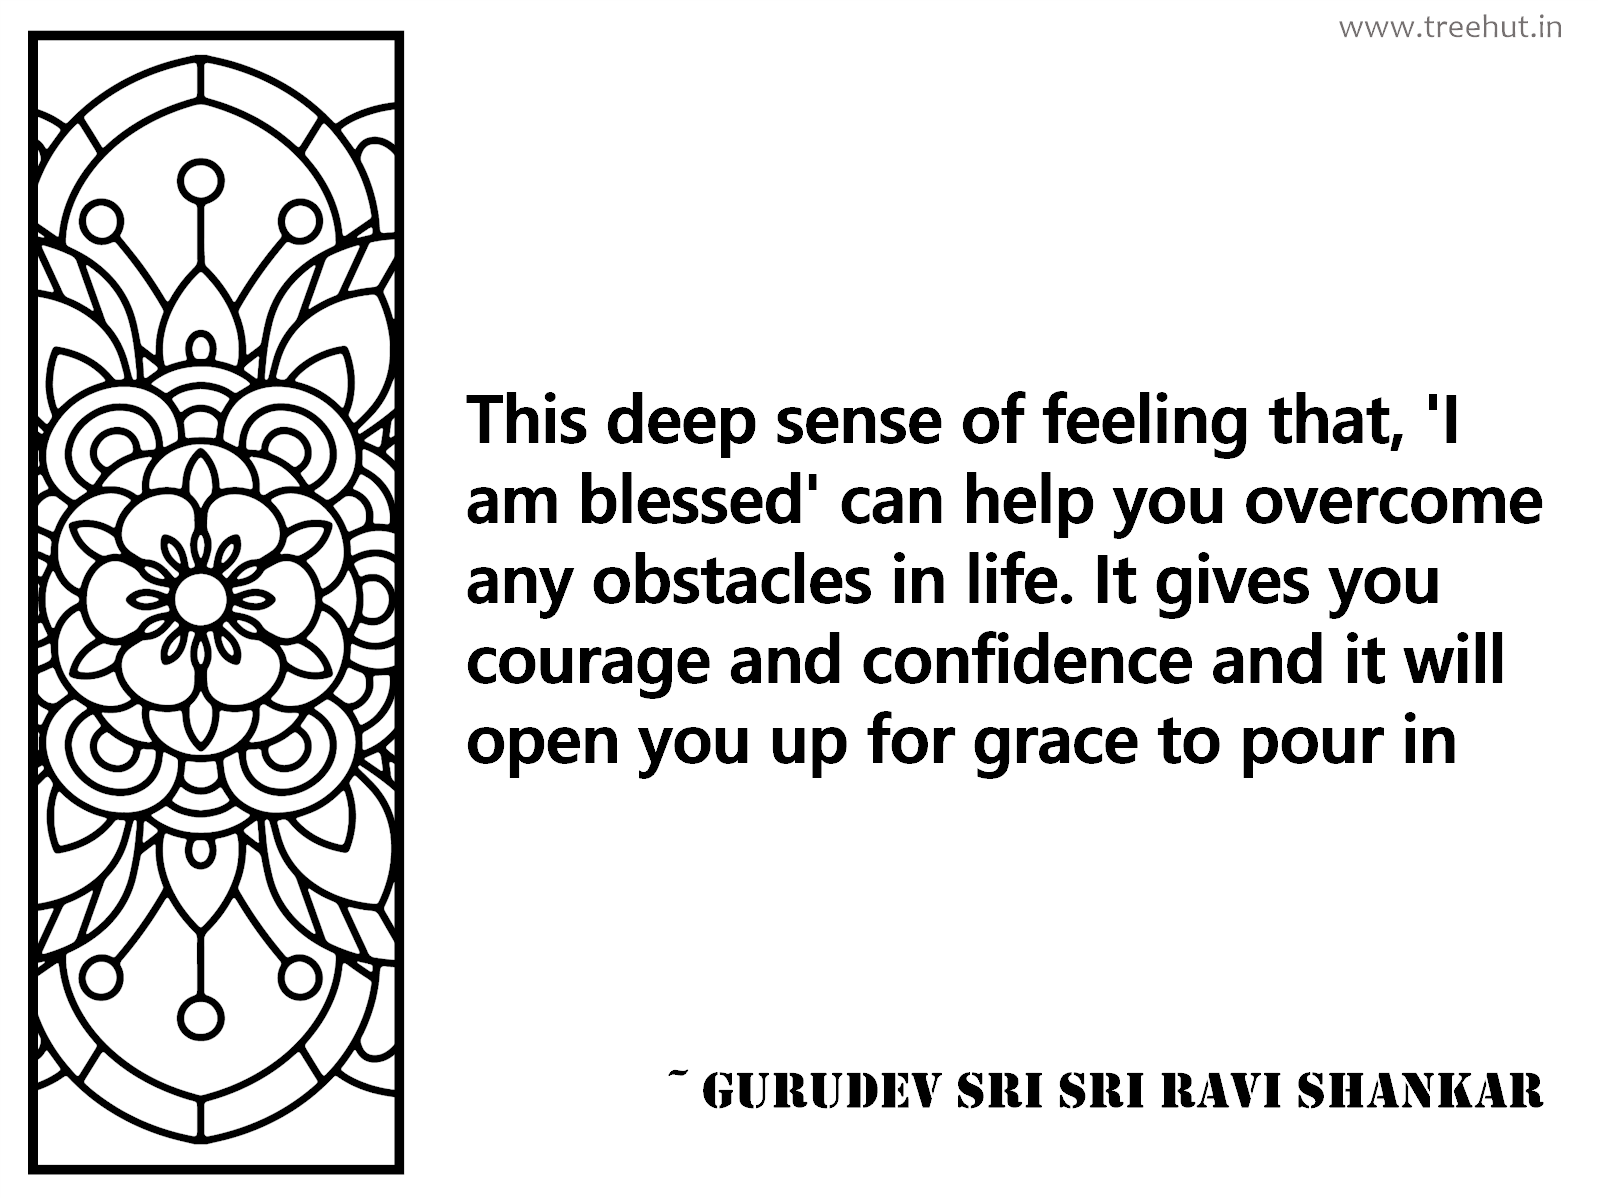 This deep sense of feeling that, 'I am blessed' can help you overcome any obstacles in life. It gives you courage and confidence and it will open you up for grace to pour in Inspirational Quote by Gurudev Sri Sri Ravi Shankar, coloring pages